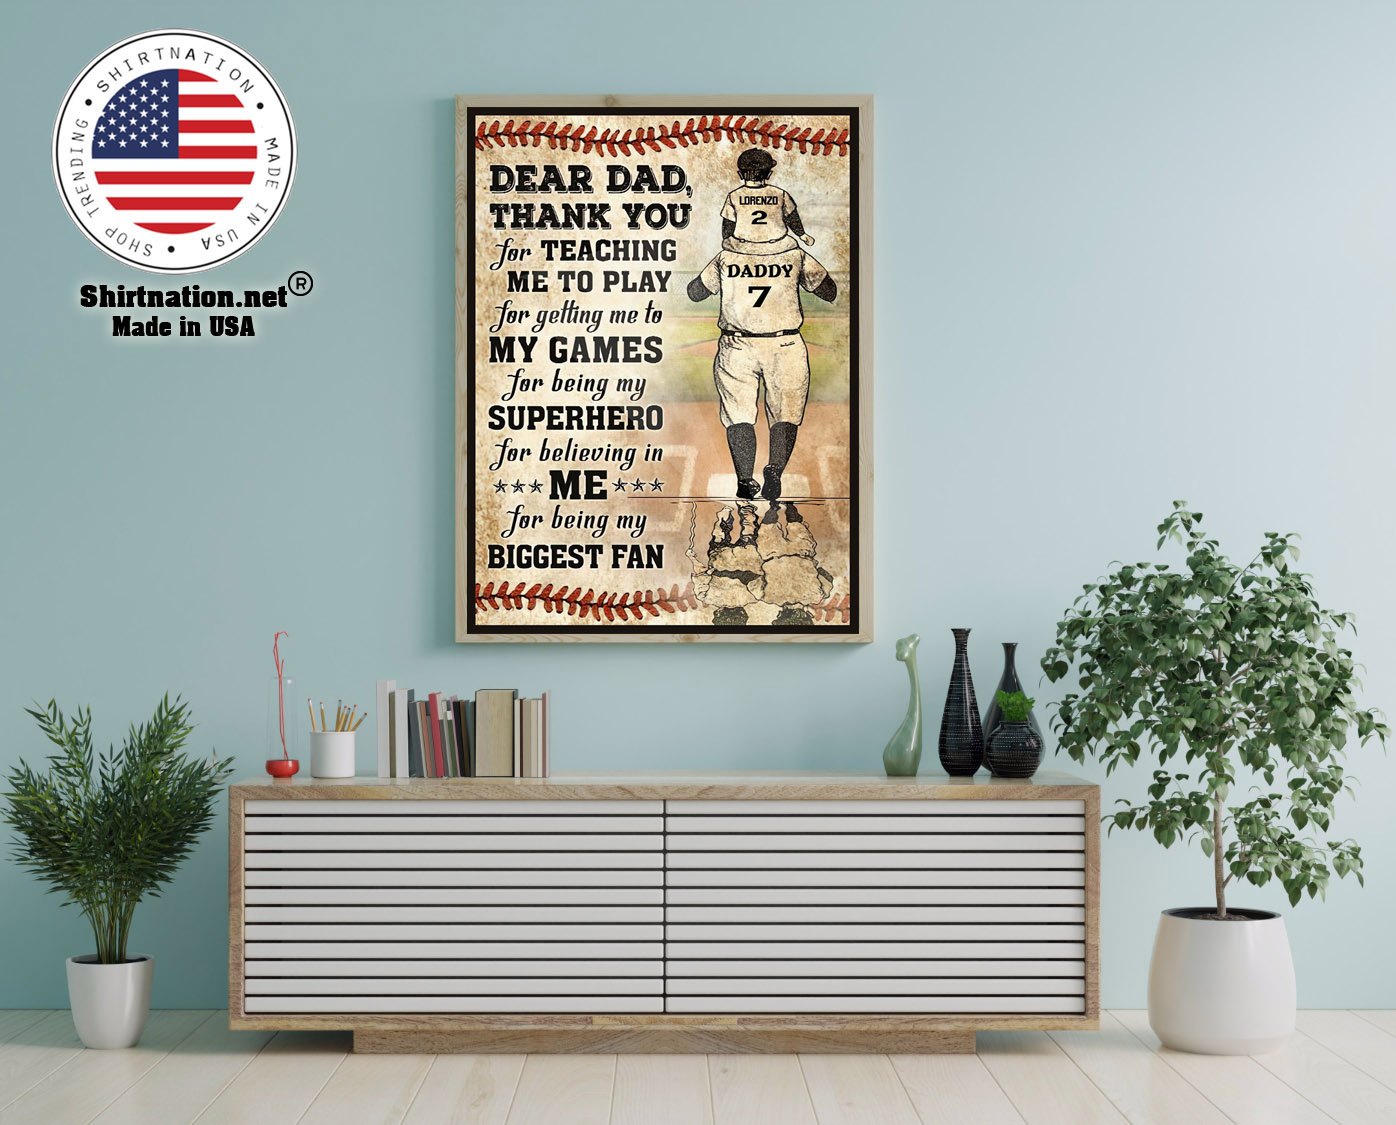 Baseball Dear dad thank you for teaching me to play for getting me to my games custom poster 12